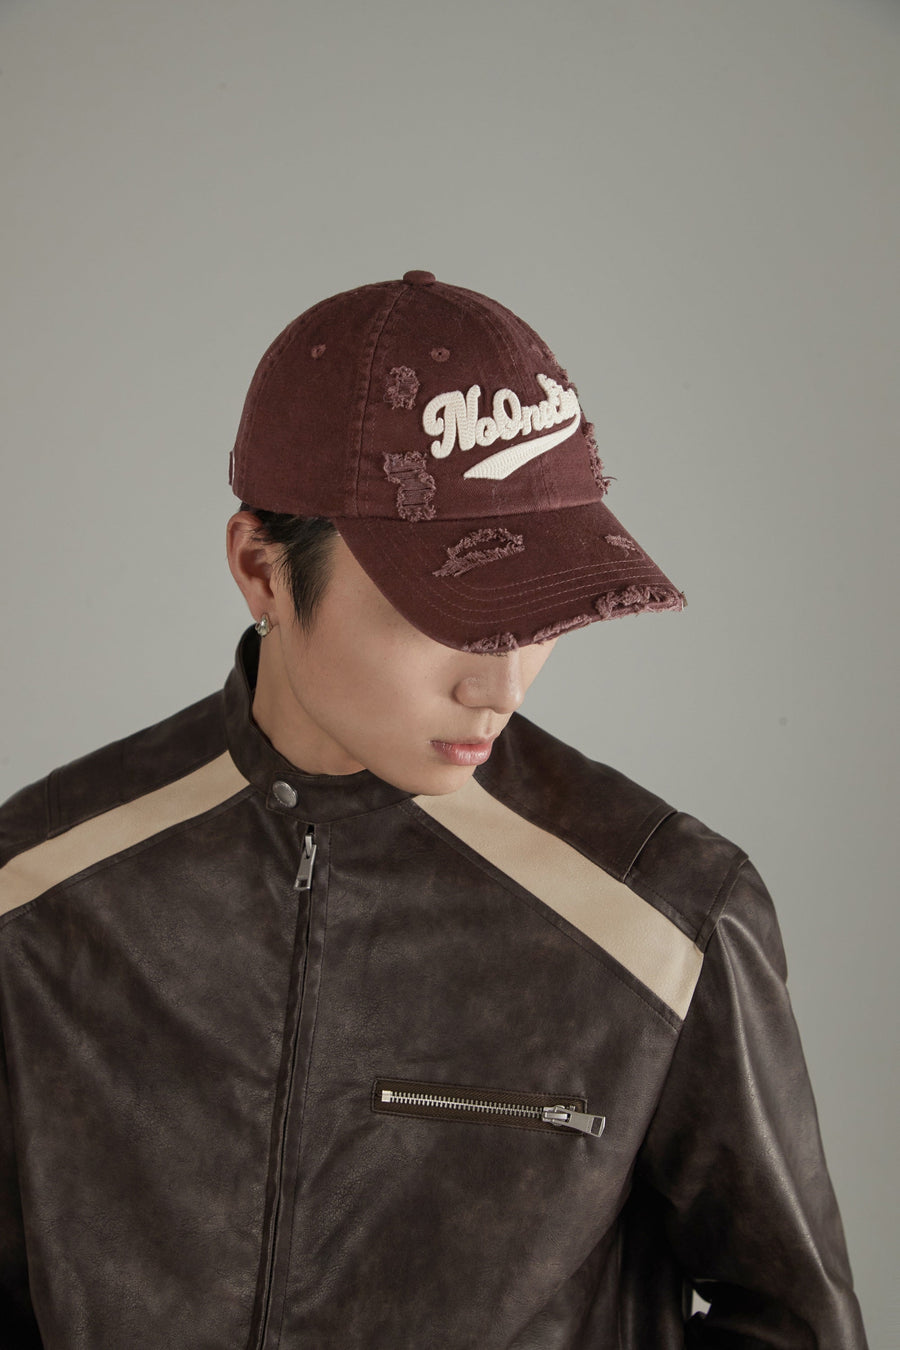 CHUU Distressed Lettering Ball Cap